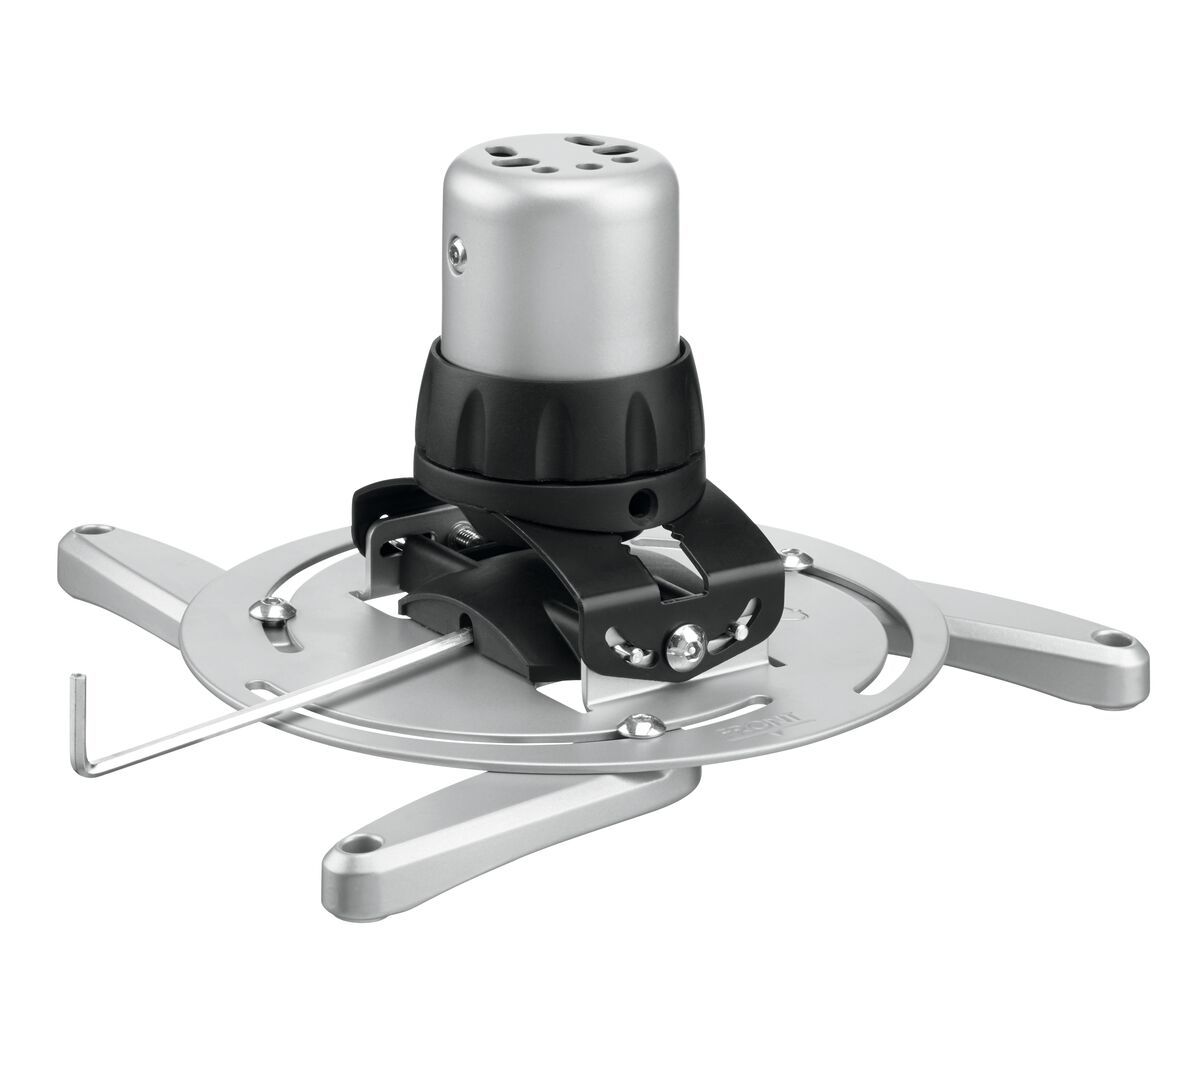 Vogel's PPC 1500 Projector Ceiling Mount (silver) - Detail